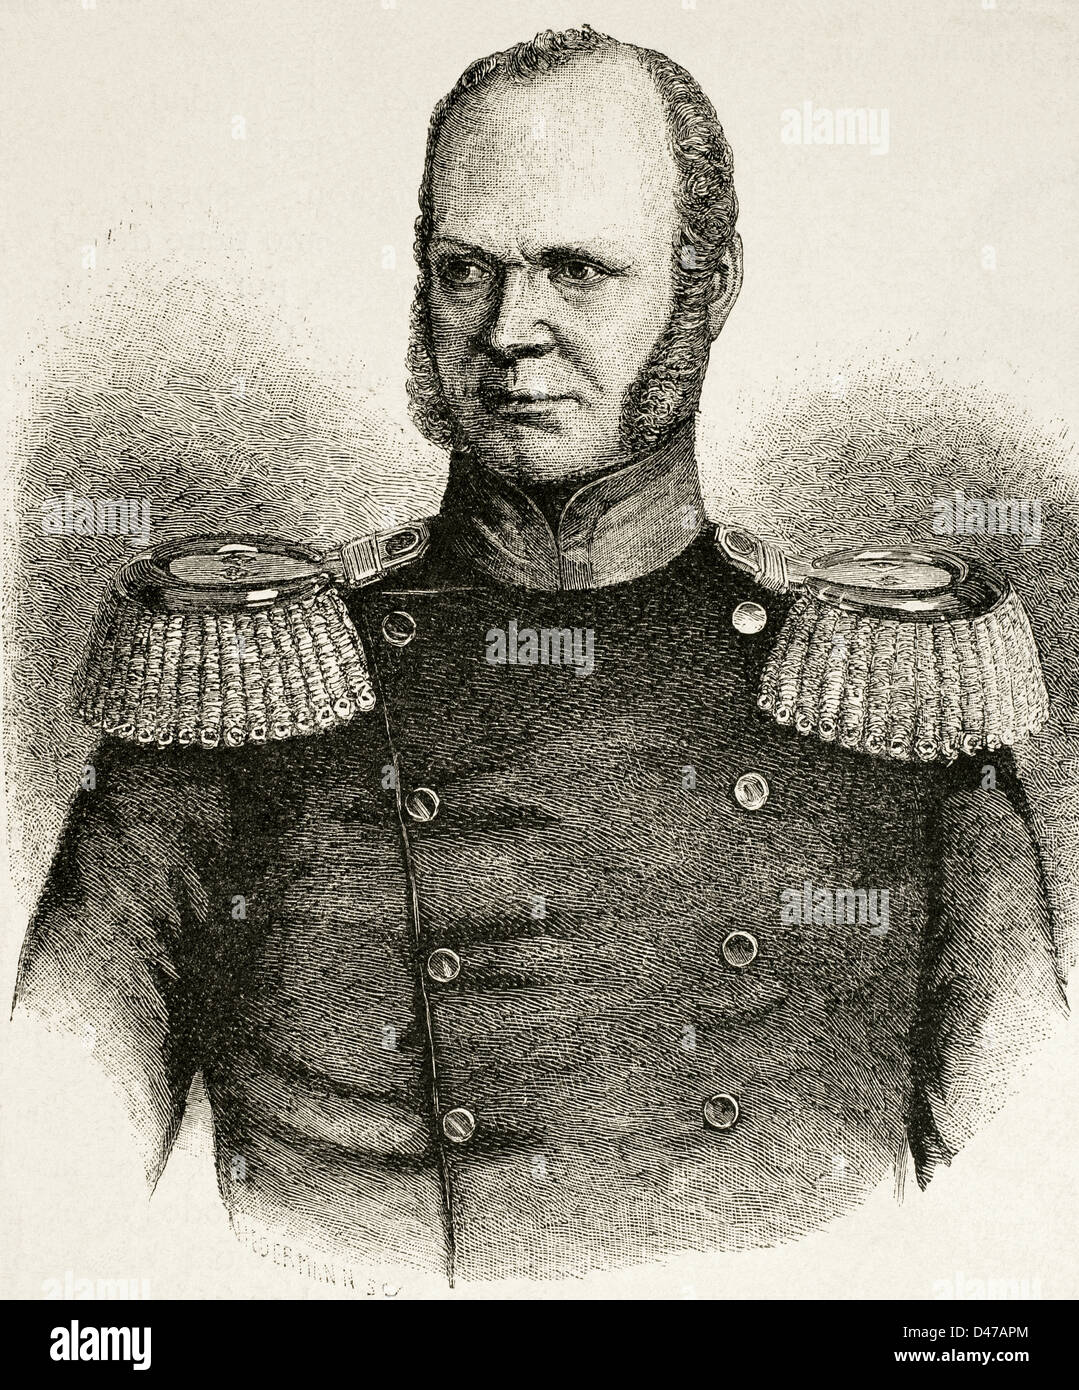 Friedrich Wilhelm, Count Brandenburg (1792-1850). German military and politician. Engraving in The Universal History, 1885 Stock Photo